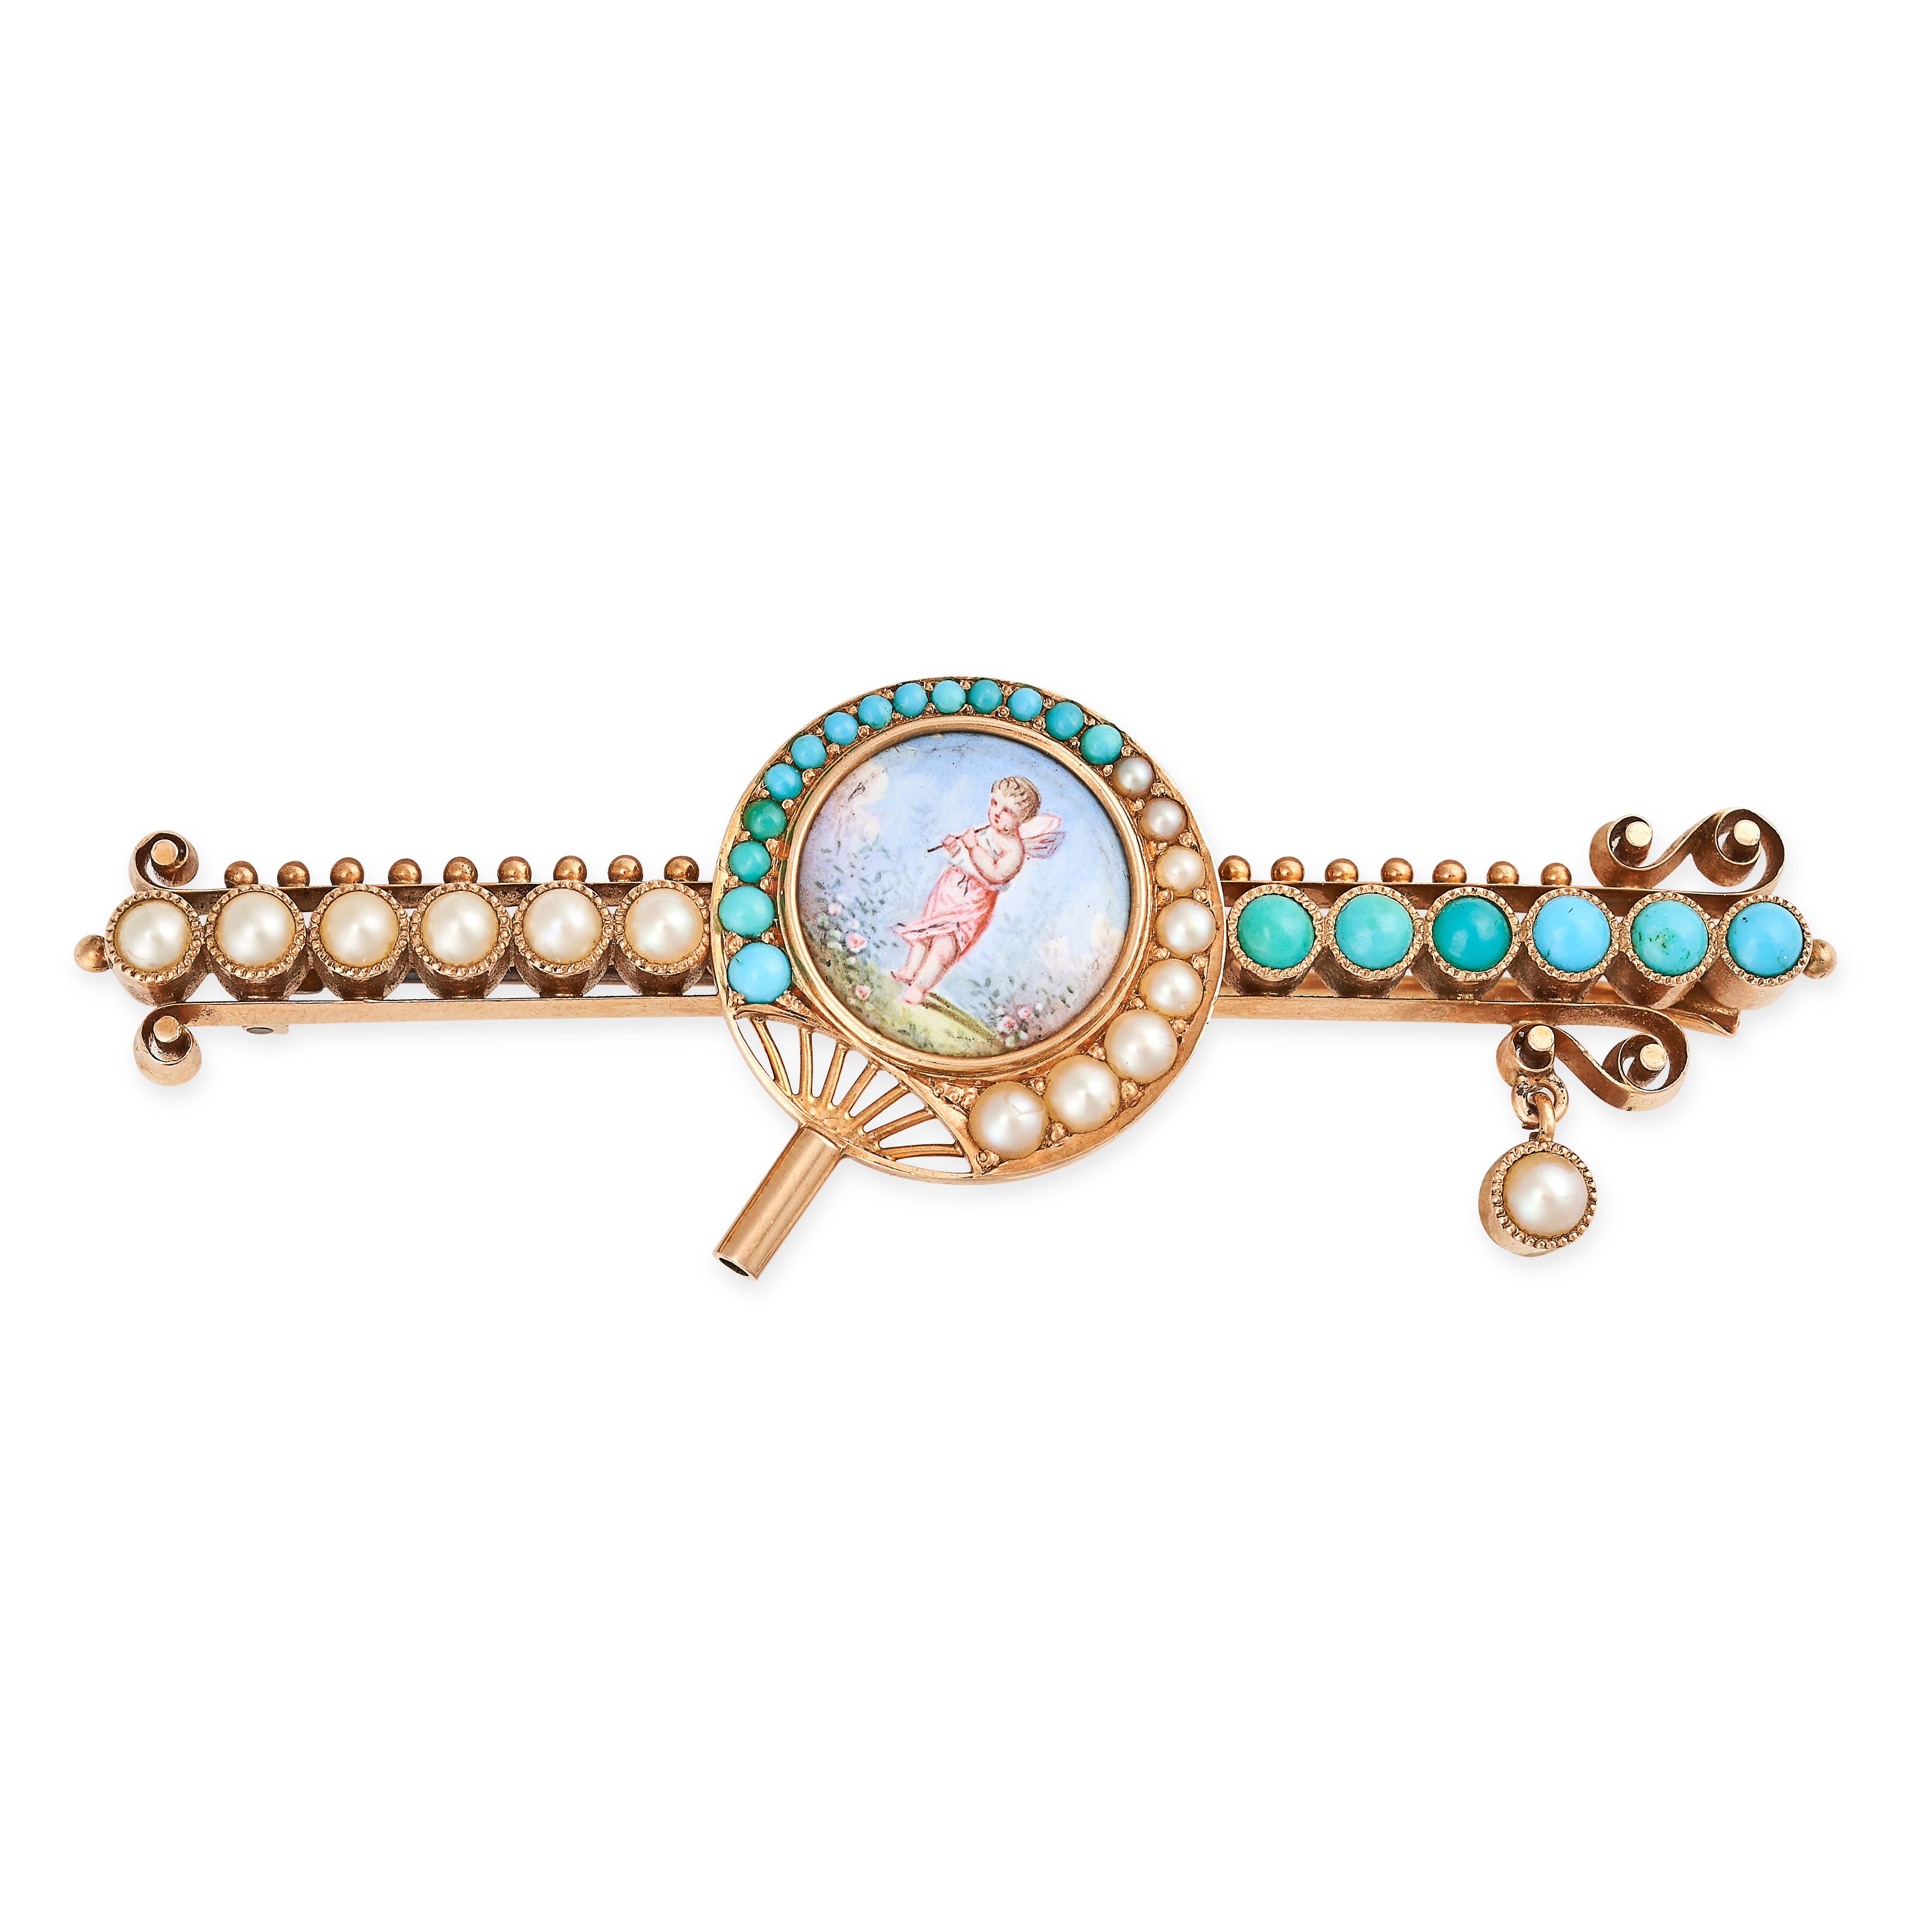 AN ANTIQUE PEARL, TURQUOISE AND ENAMEL BAR BROOCH in yellow gold, comprising a central fan motif ... - Image 2 of 2